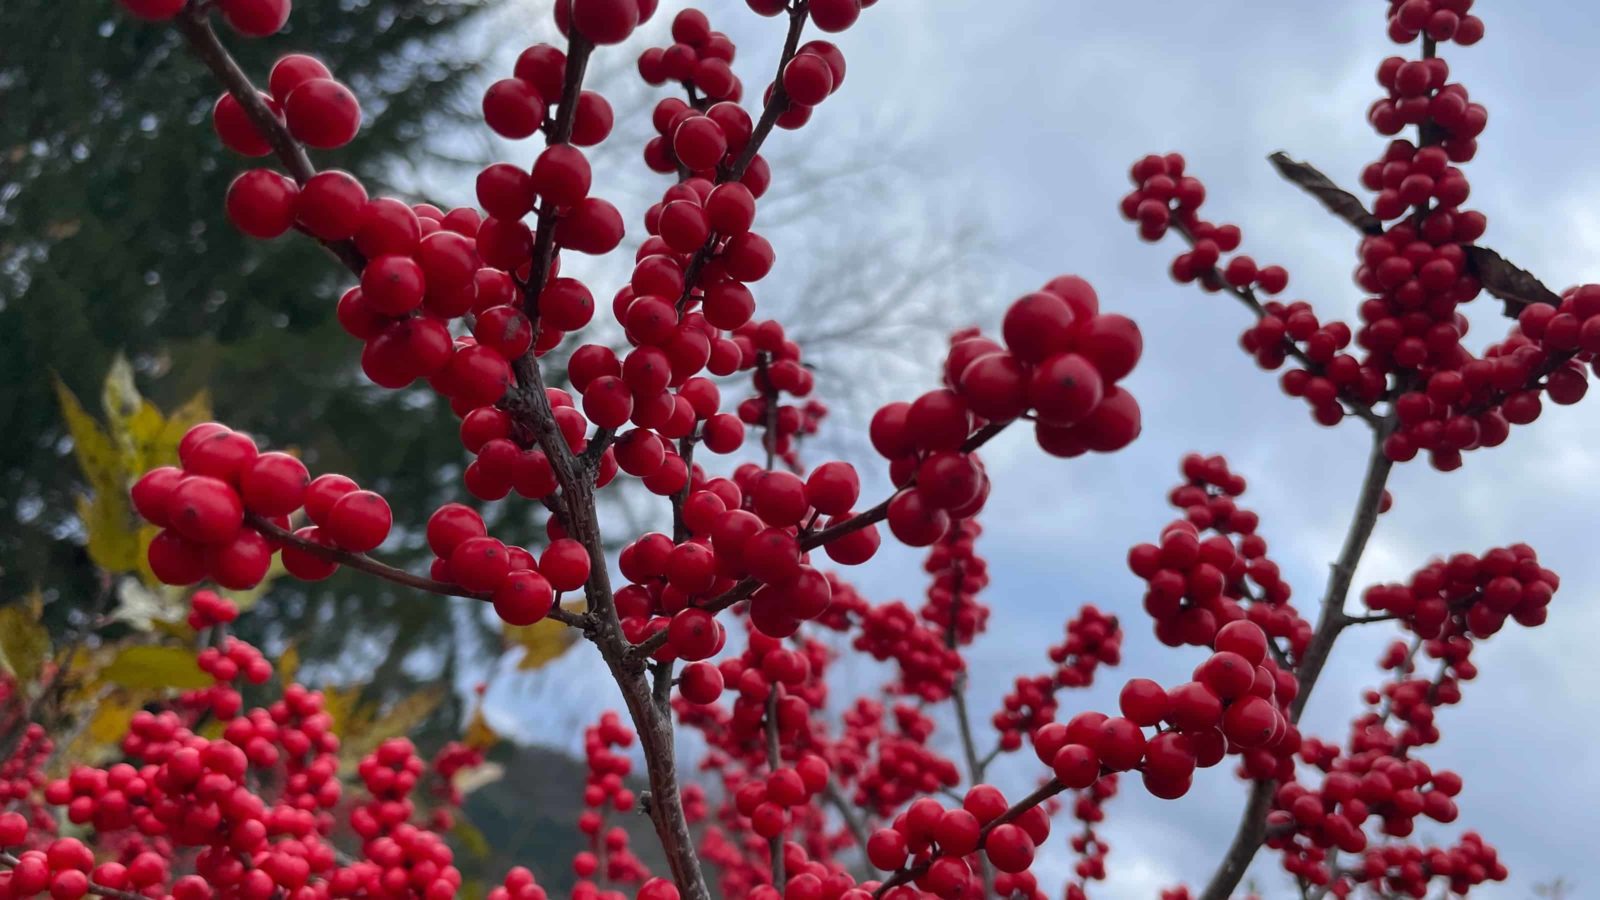 Winterberry bushes are dense with red berries in the fields at Windy Hill in Stockbridge.